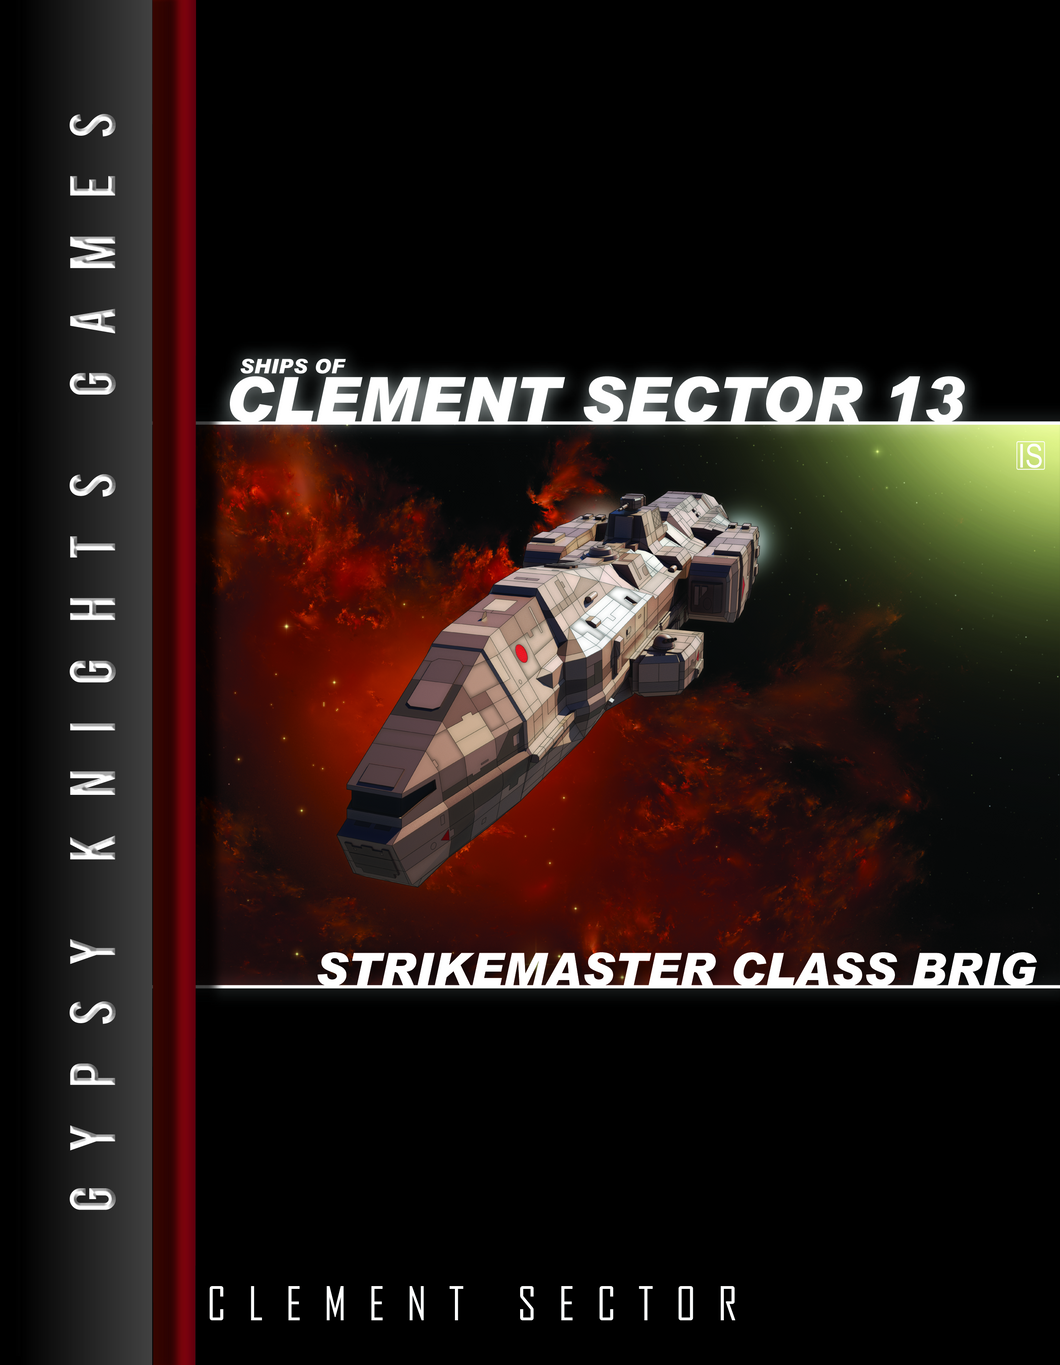 Ships of Clement Sector 13: Strikemaster-class Brig